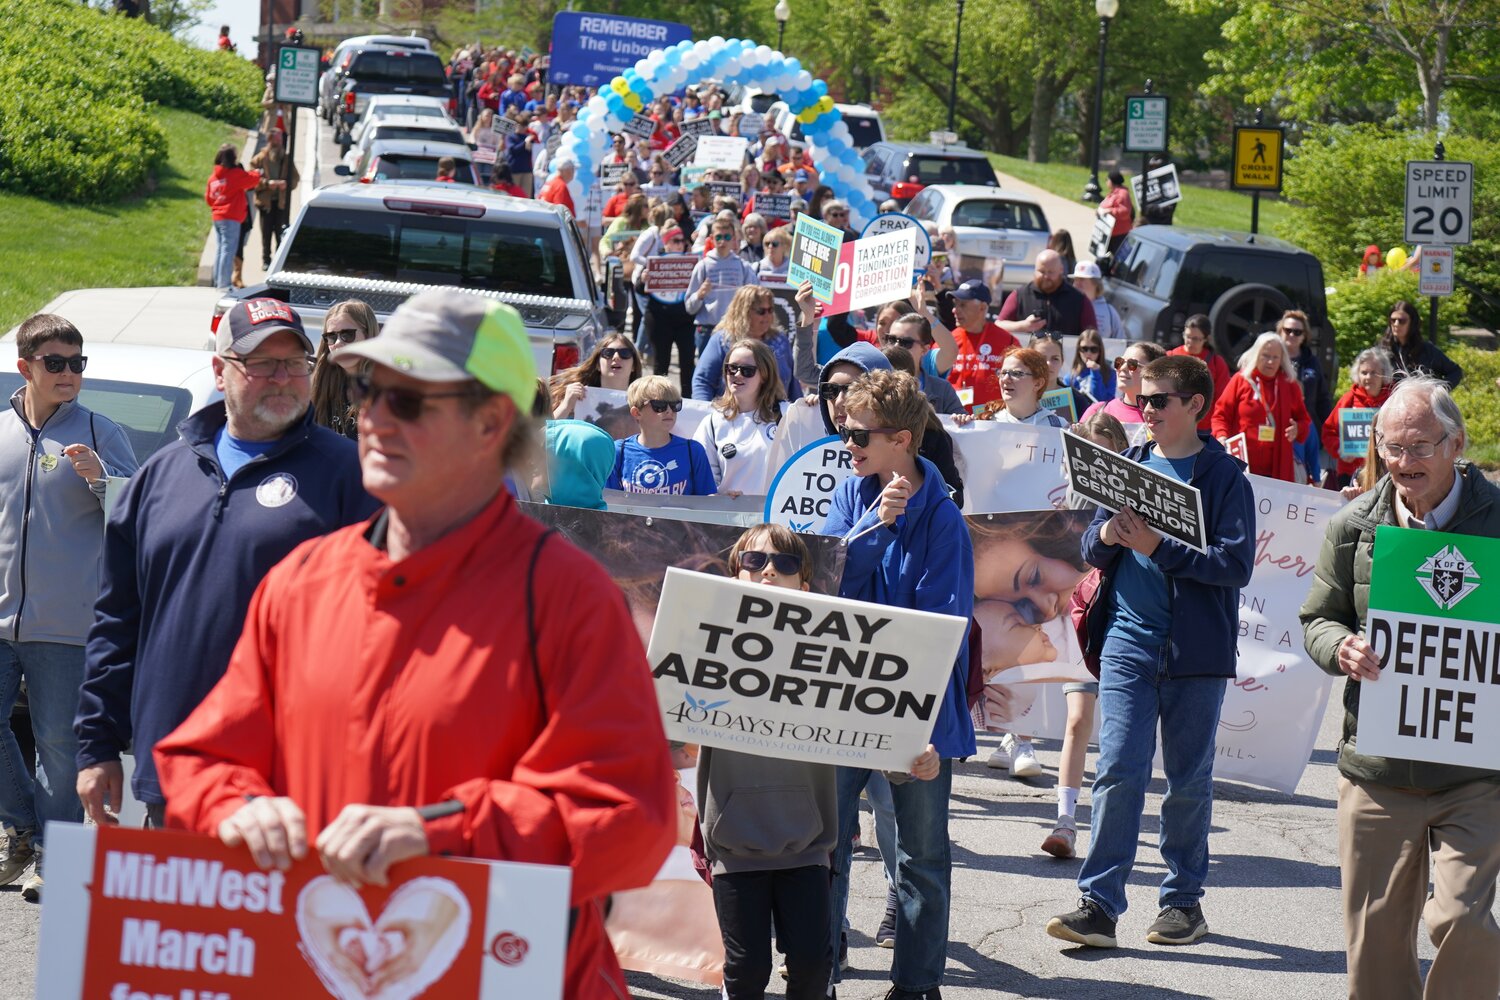 Participants in the 2023 MidWest March for Life begin their journey through the streets of downtown Jefferson City during the April 26 event on the grounds of the Missouri State Capitol.